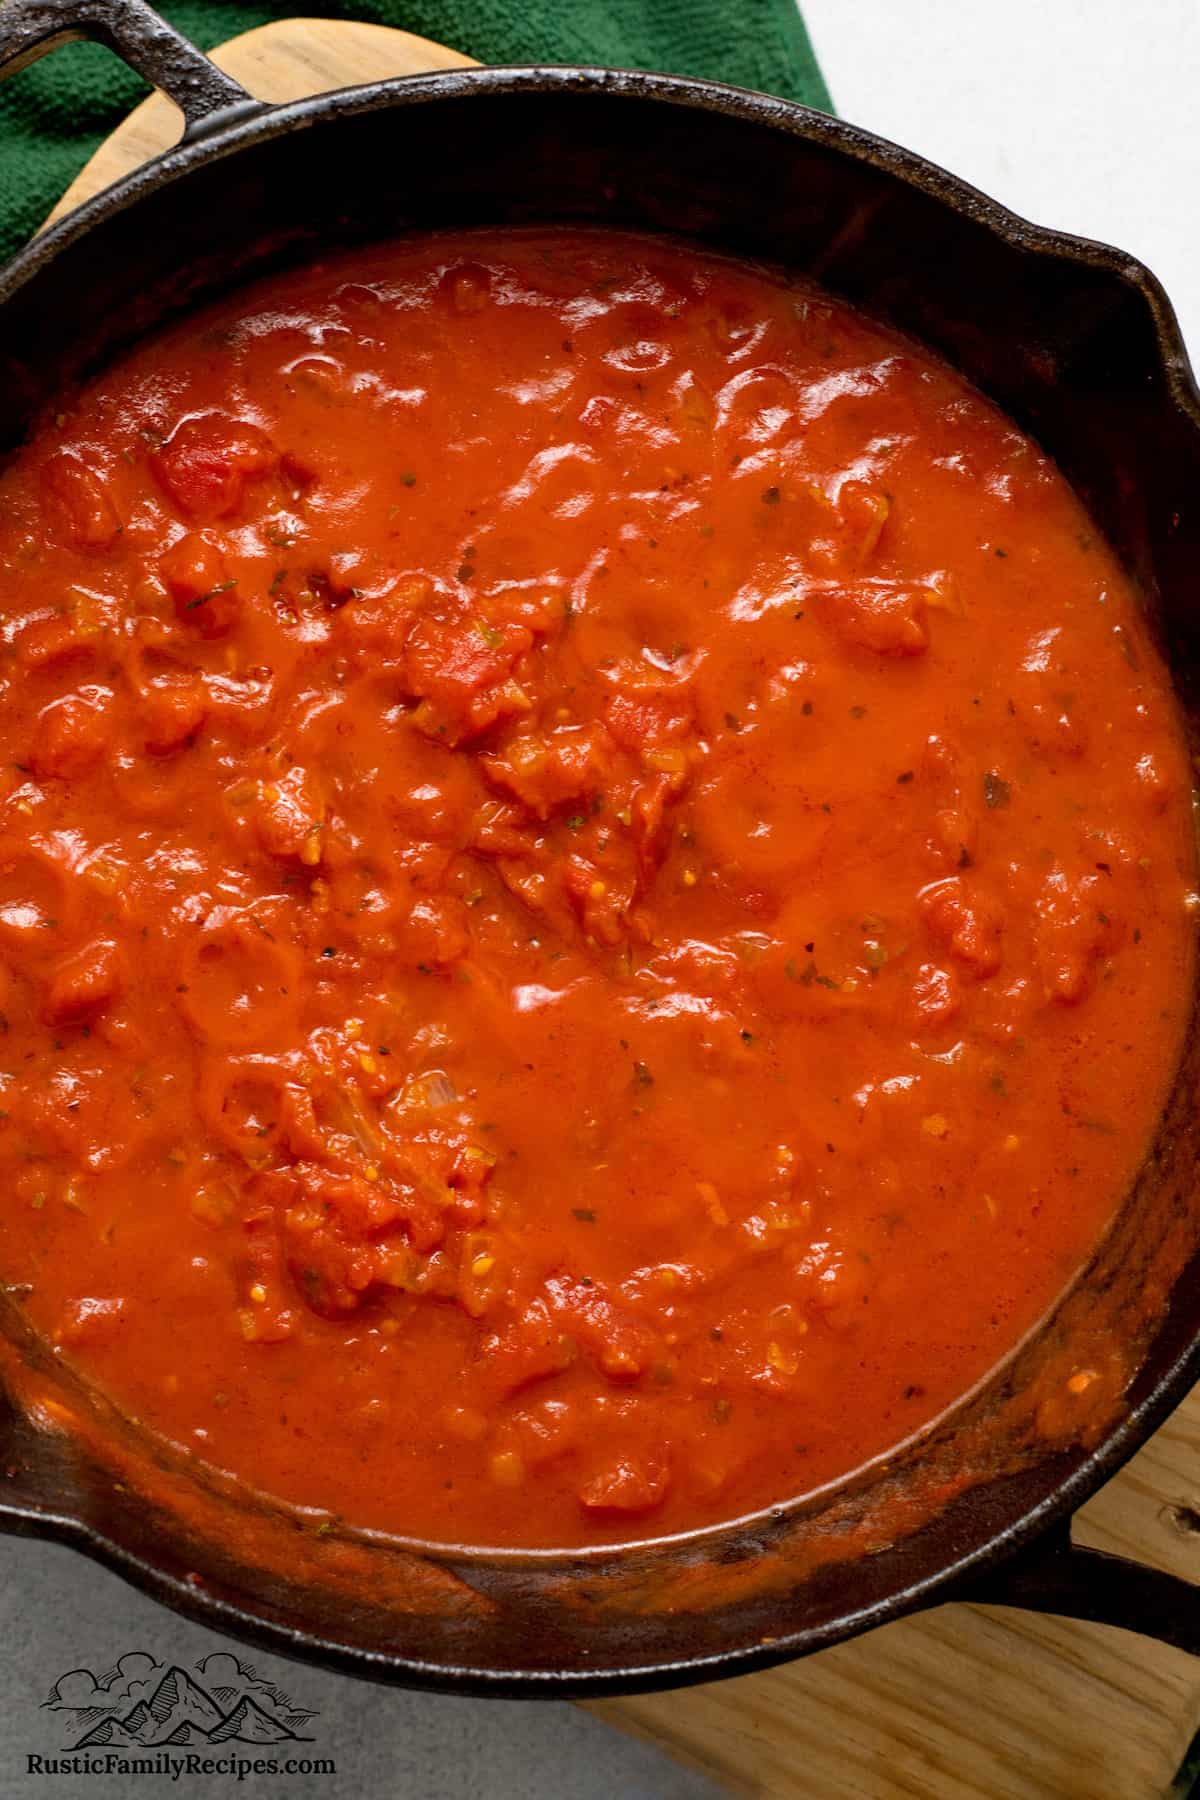 Cooking tomato sauce for Chicken Sorrentino.